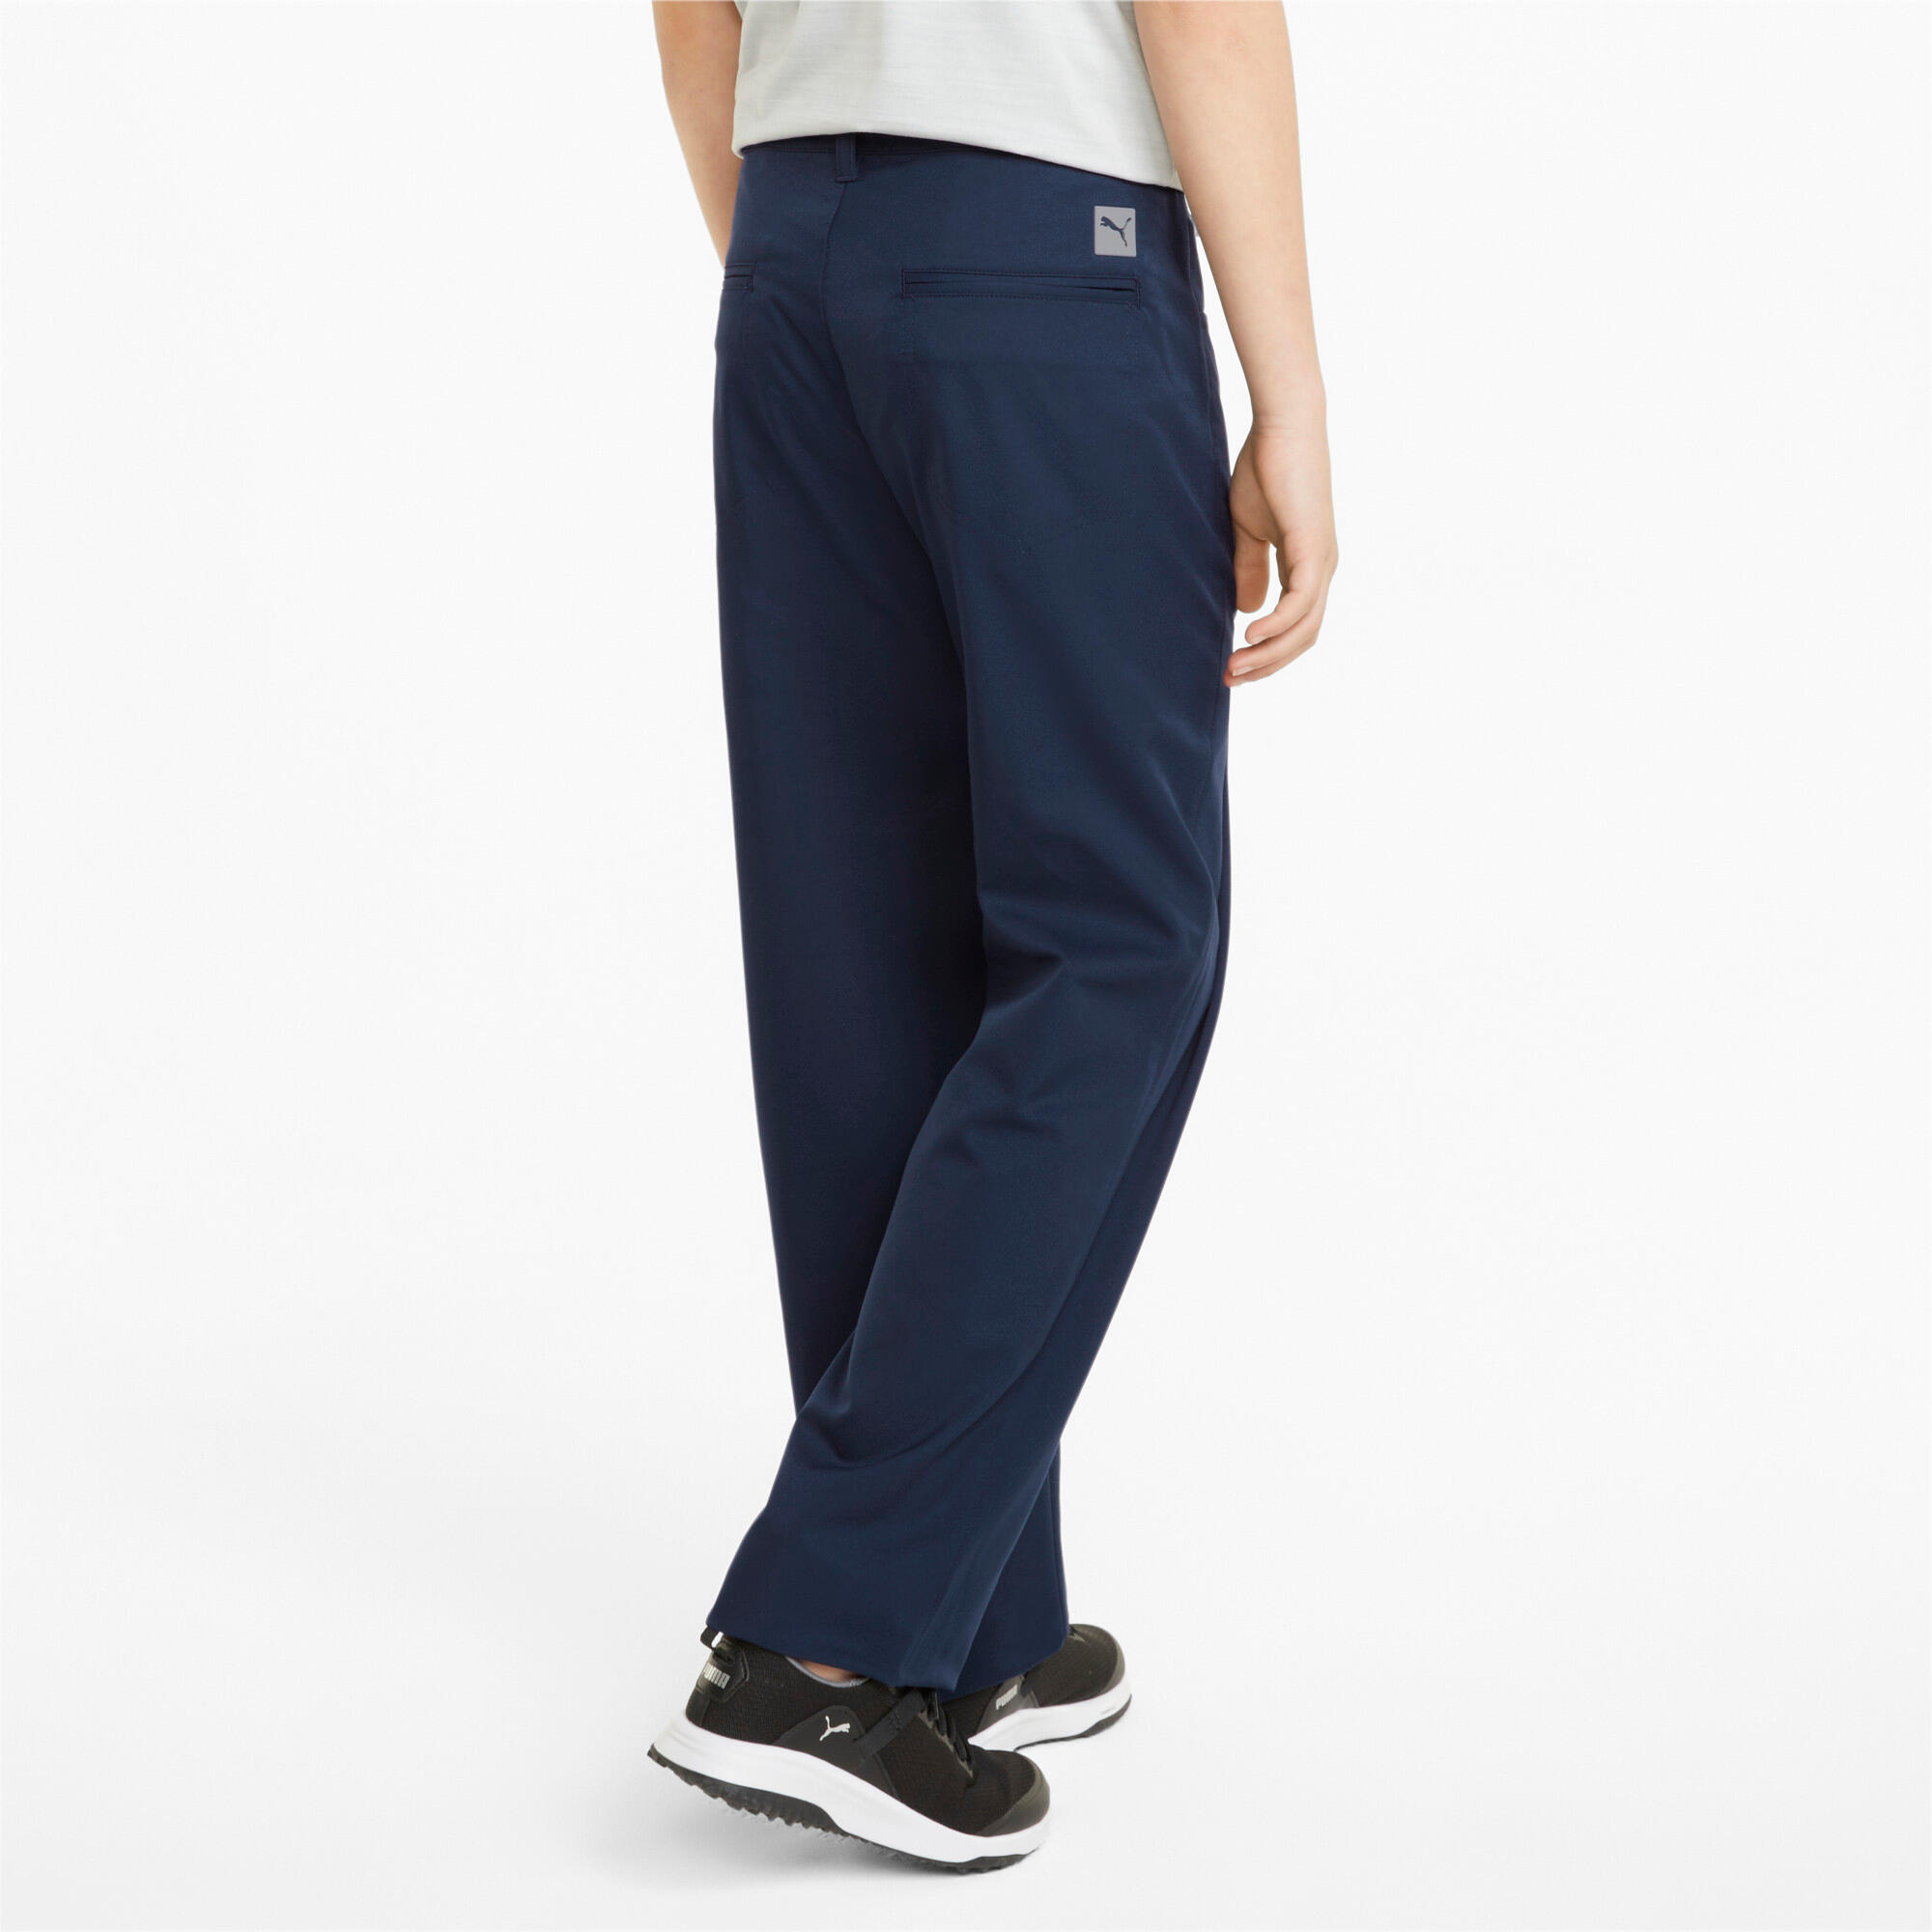 Golf Pants for Sale - Buy Golf Trousers Online | GolfBox